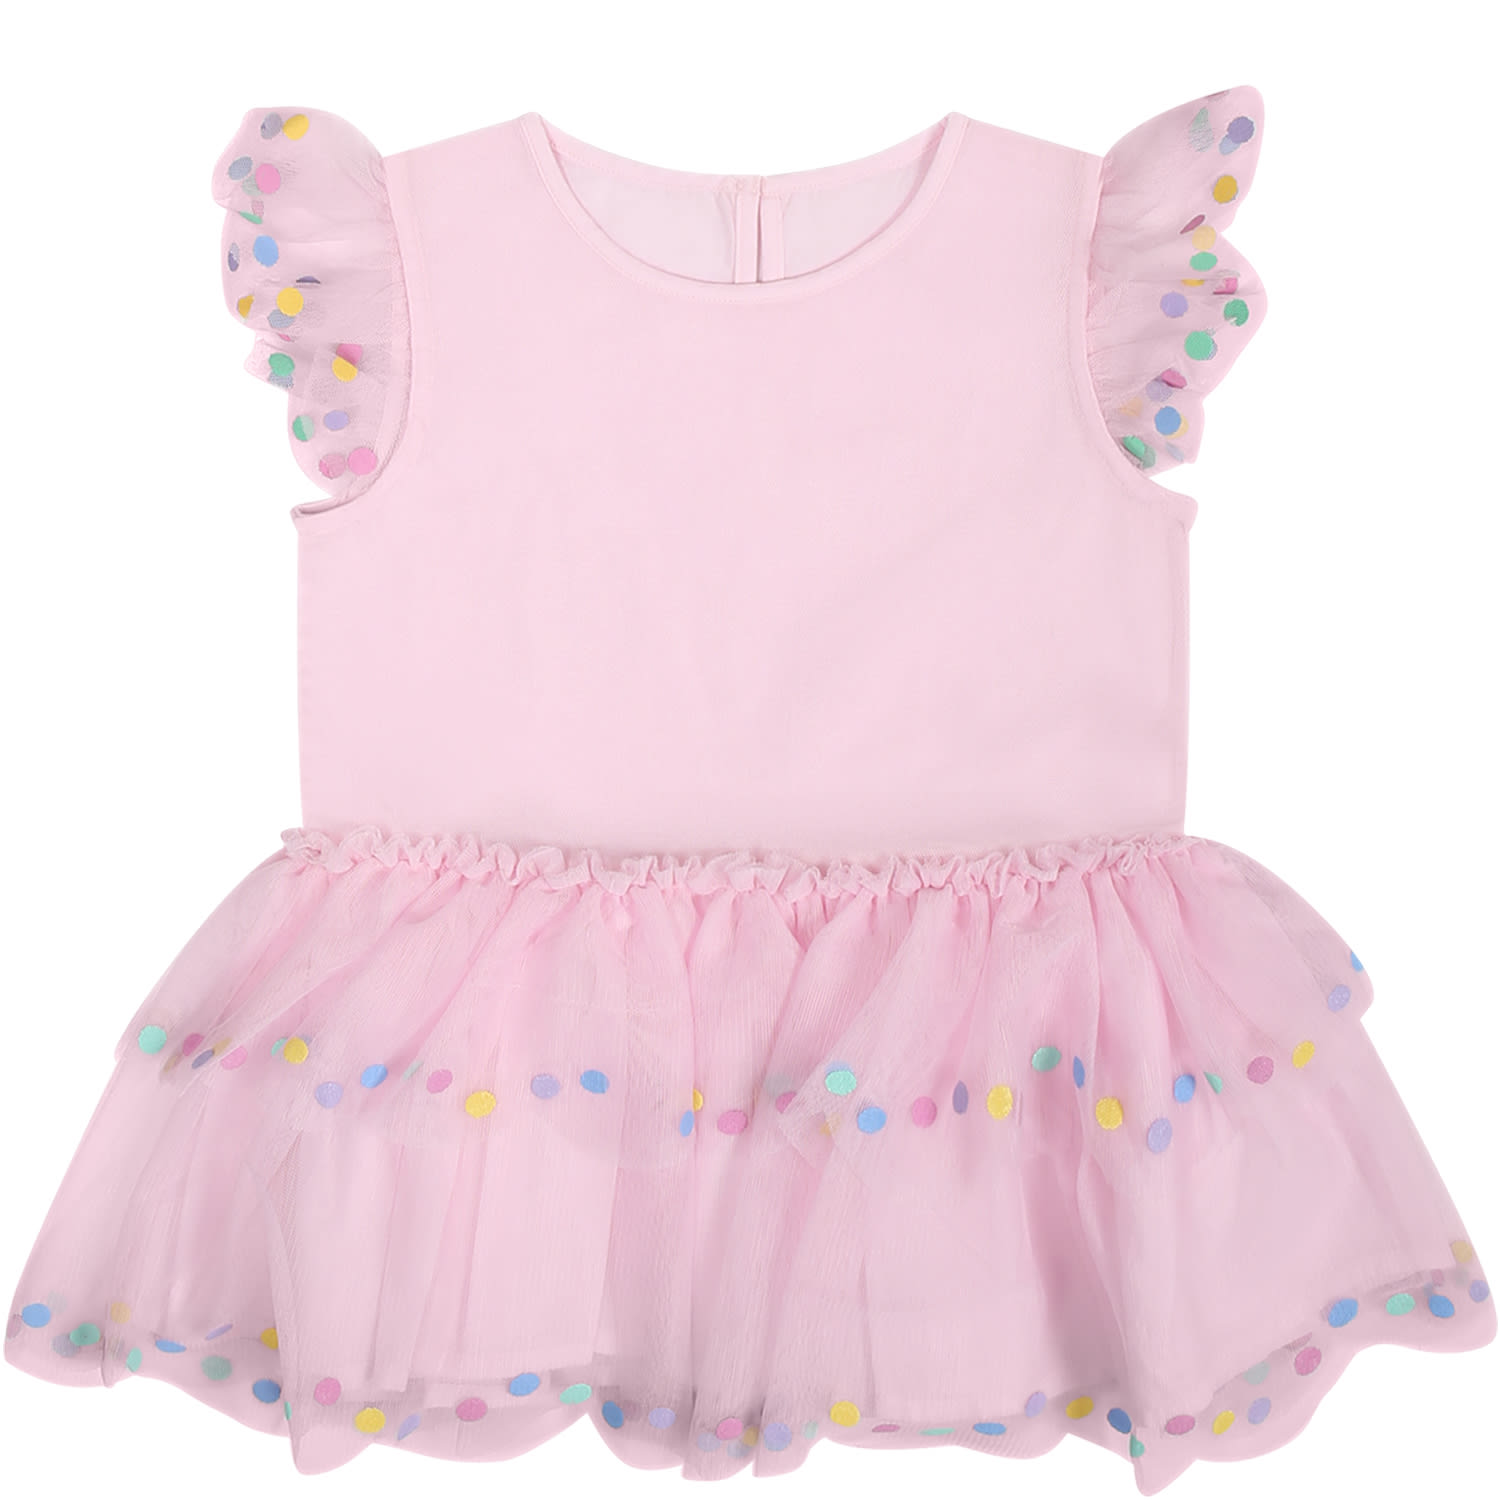 Stella Mccartney Kids' Pink Dress For Baby Girl With Polka Dots